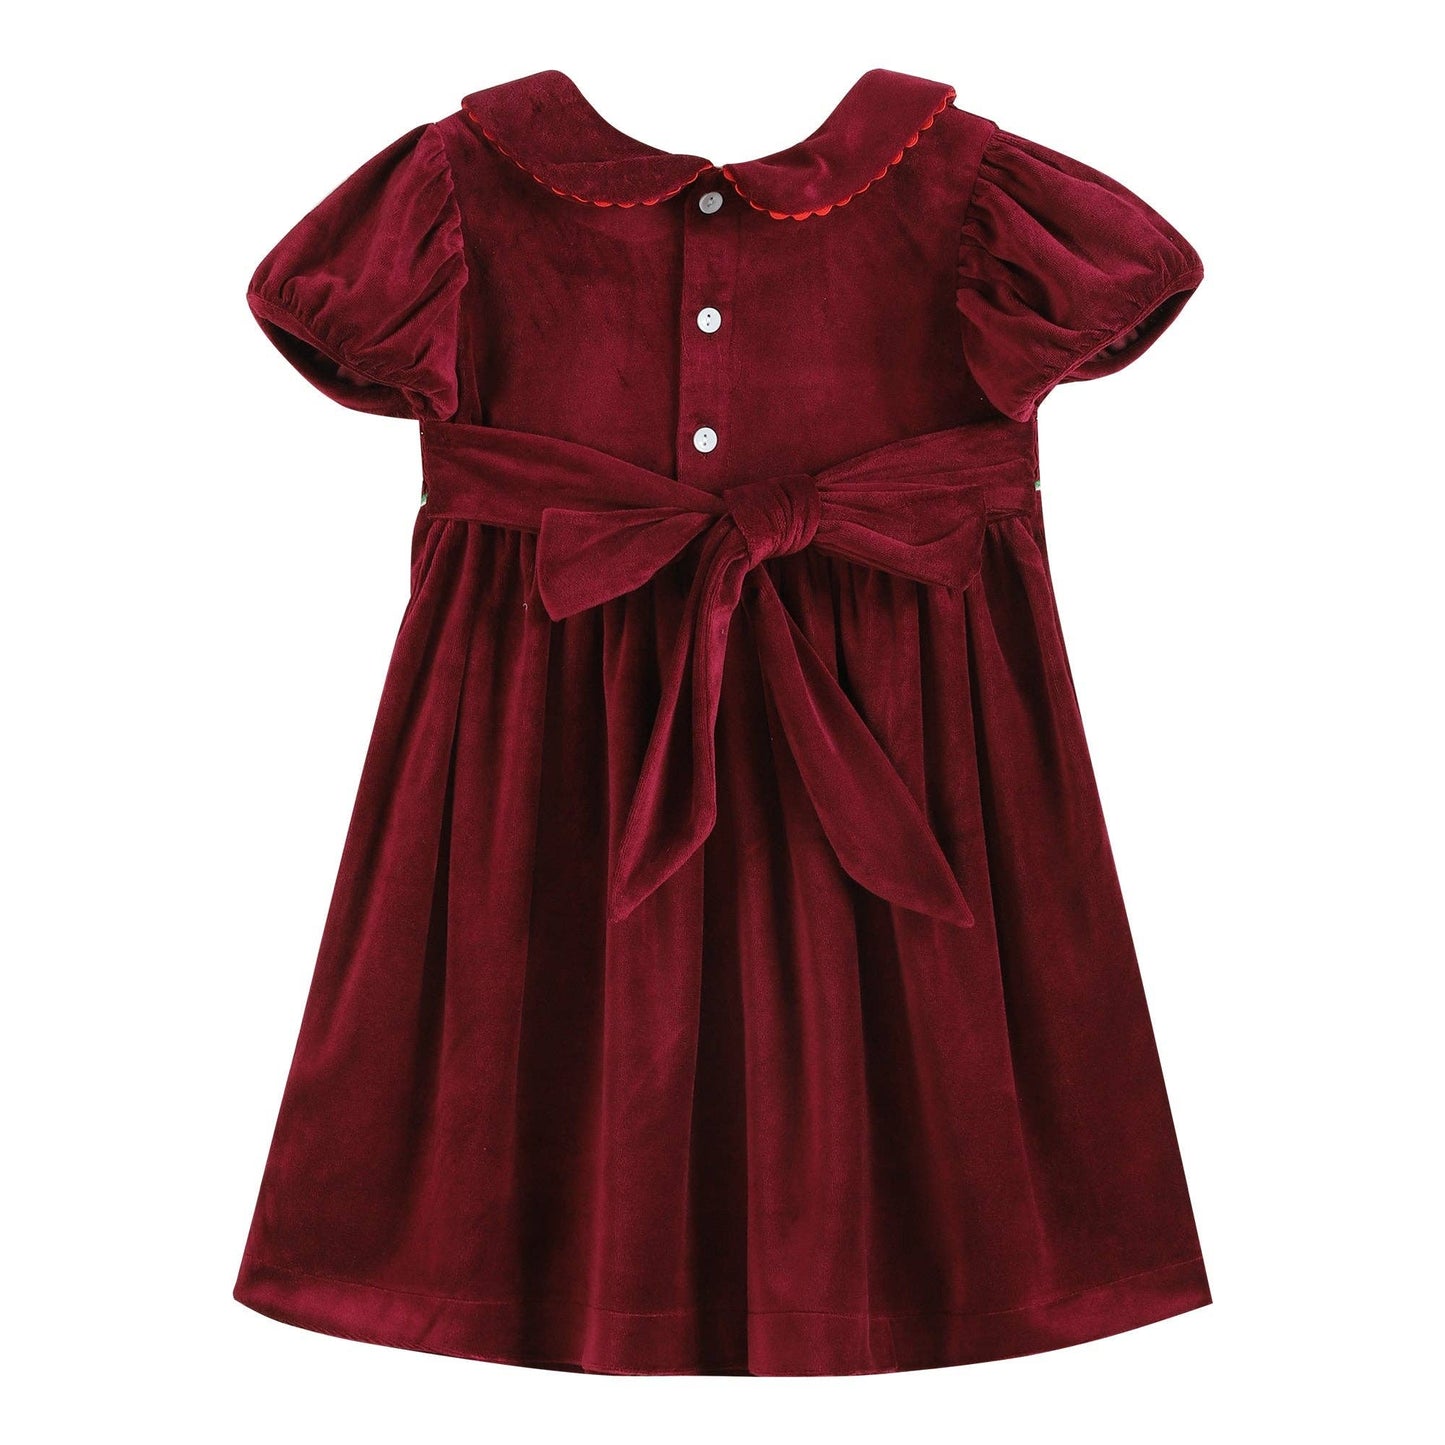 A cute girl's Lil Cactus Red Velour Christmas Tree Smocked Dress: 12-18M with a bow on the collar, perfect for Christmas.